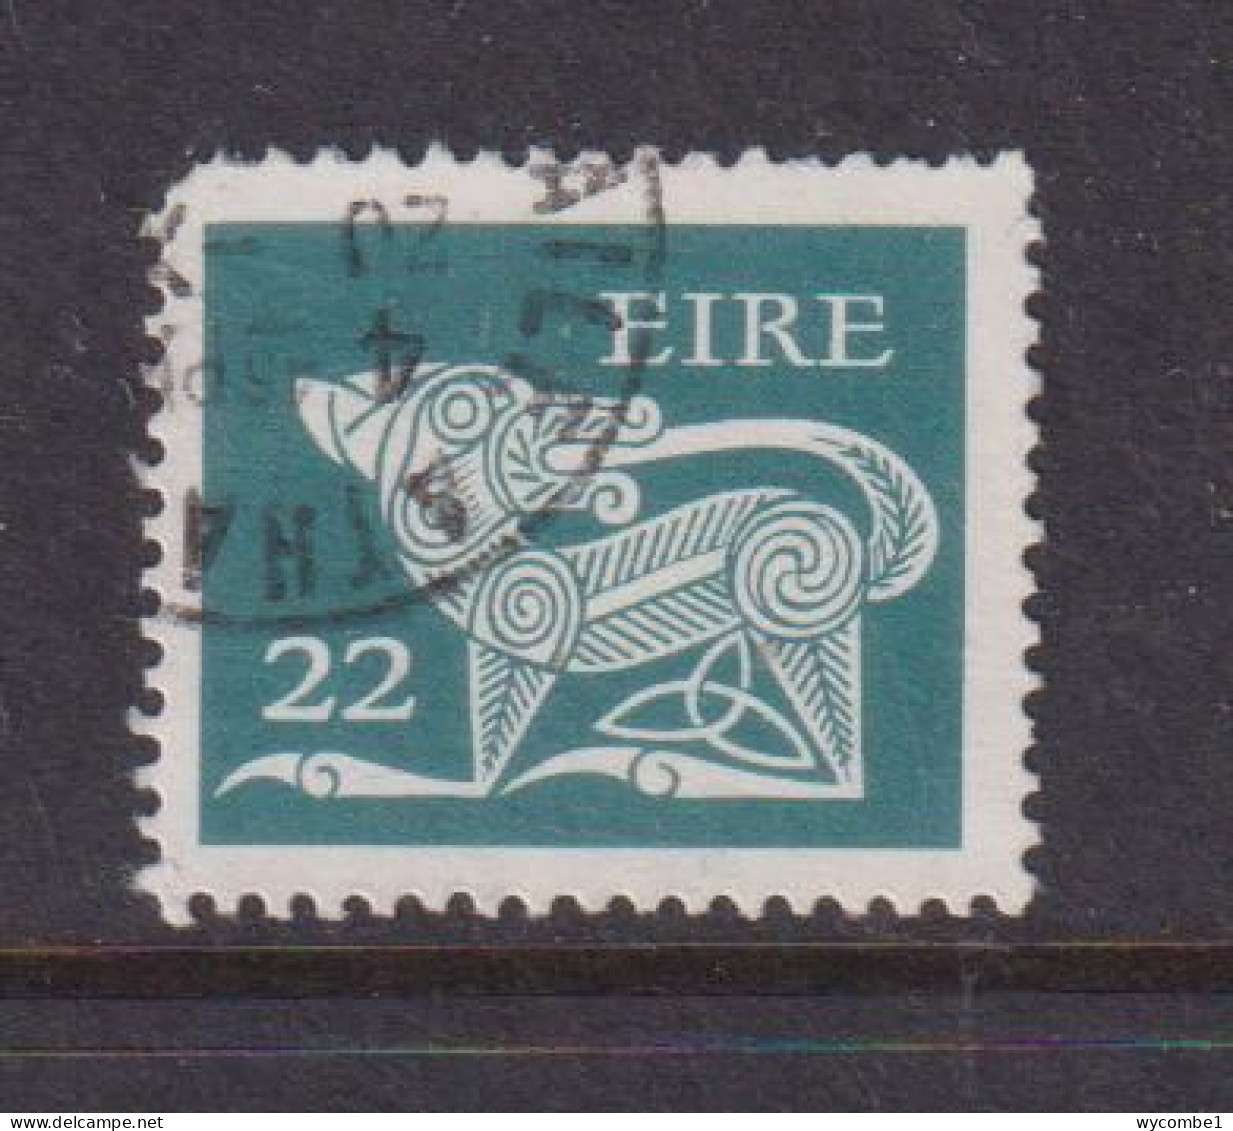 IRELAND - 1971  Decimal Currency Definitives 22p  Used As Scan - Used Stamps